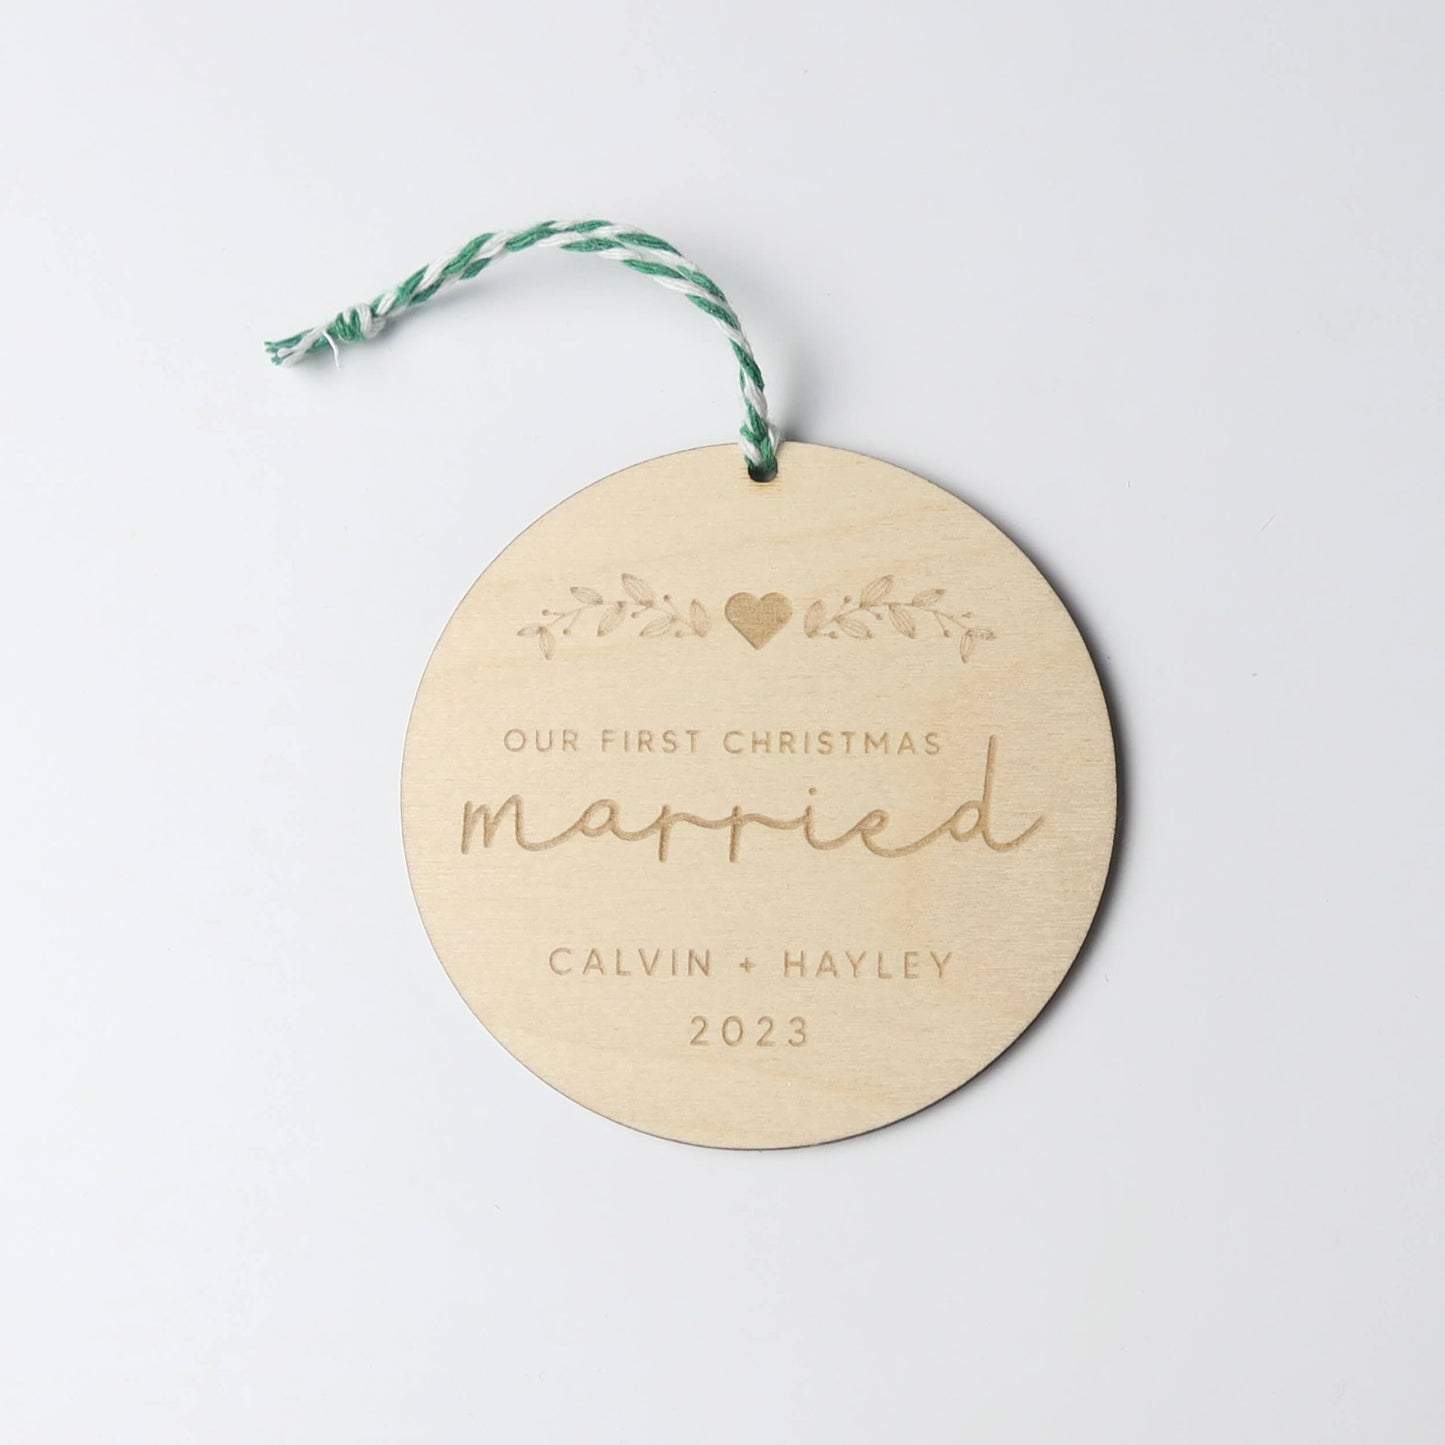 First Christmas Married Ornament Personalized - Holiday Ornaments - Moon Rock Prints